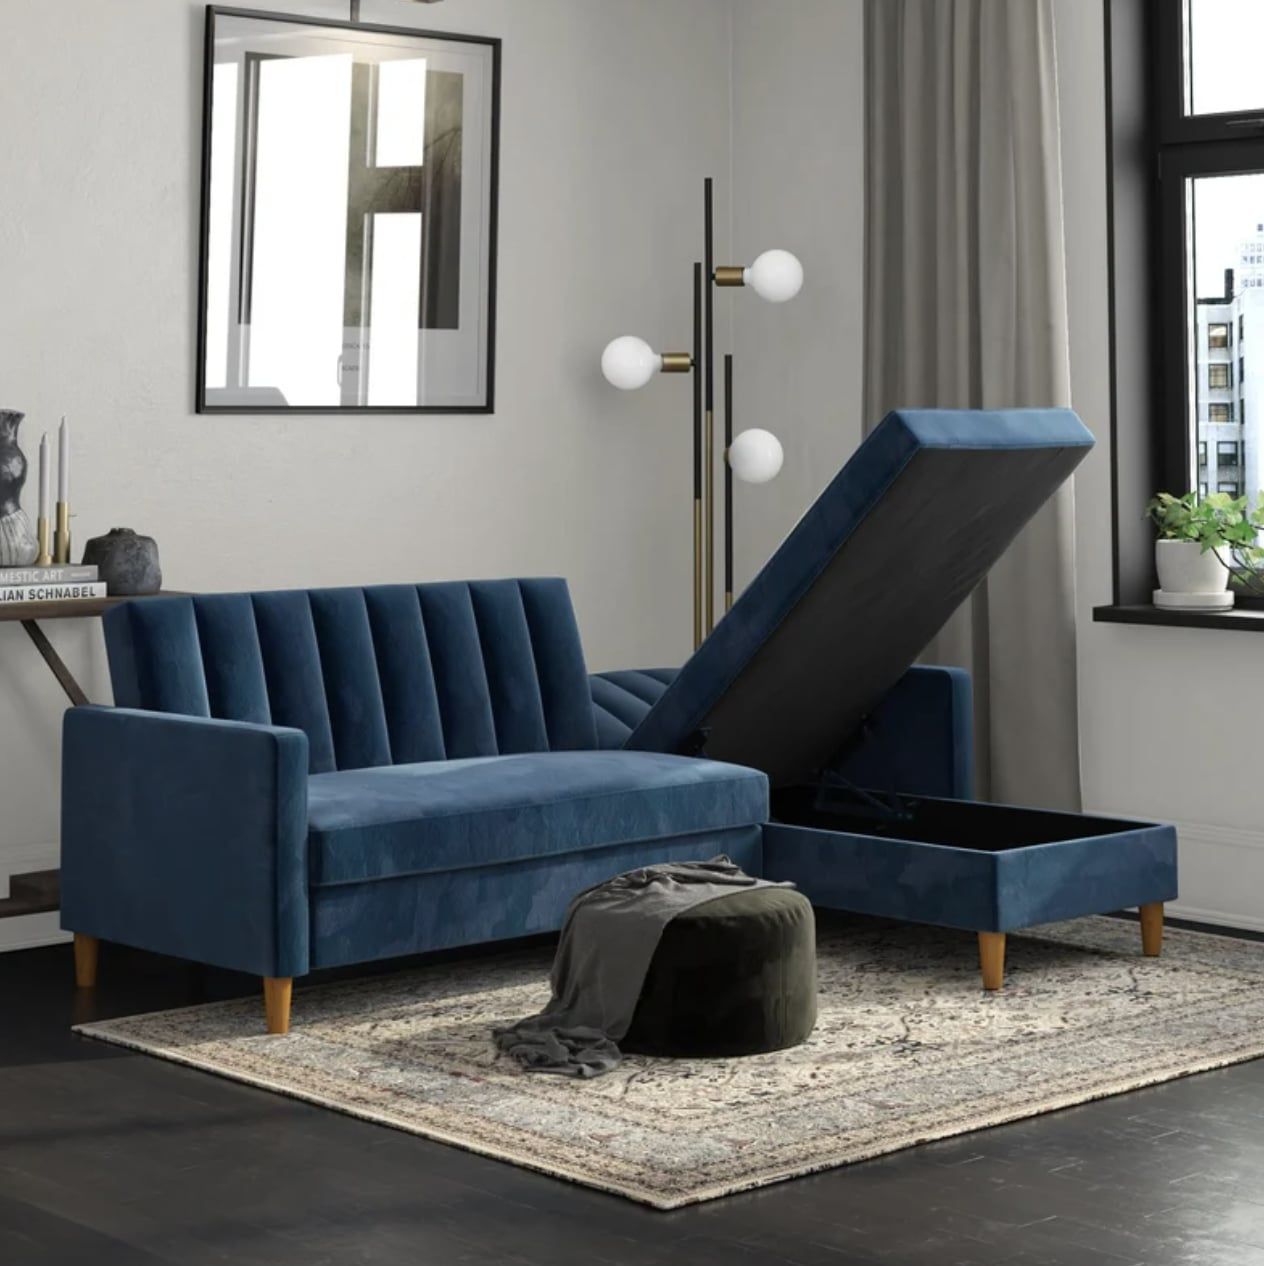 Best And Most Comfortable Sofas With Storage 2022 | Popsugar Home Pertaining To Convertible Sofa With Matching Chaise (Gallery 14 of 20)